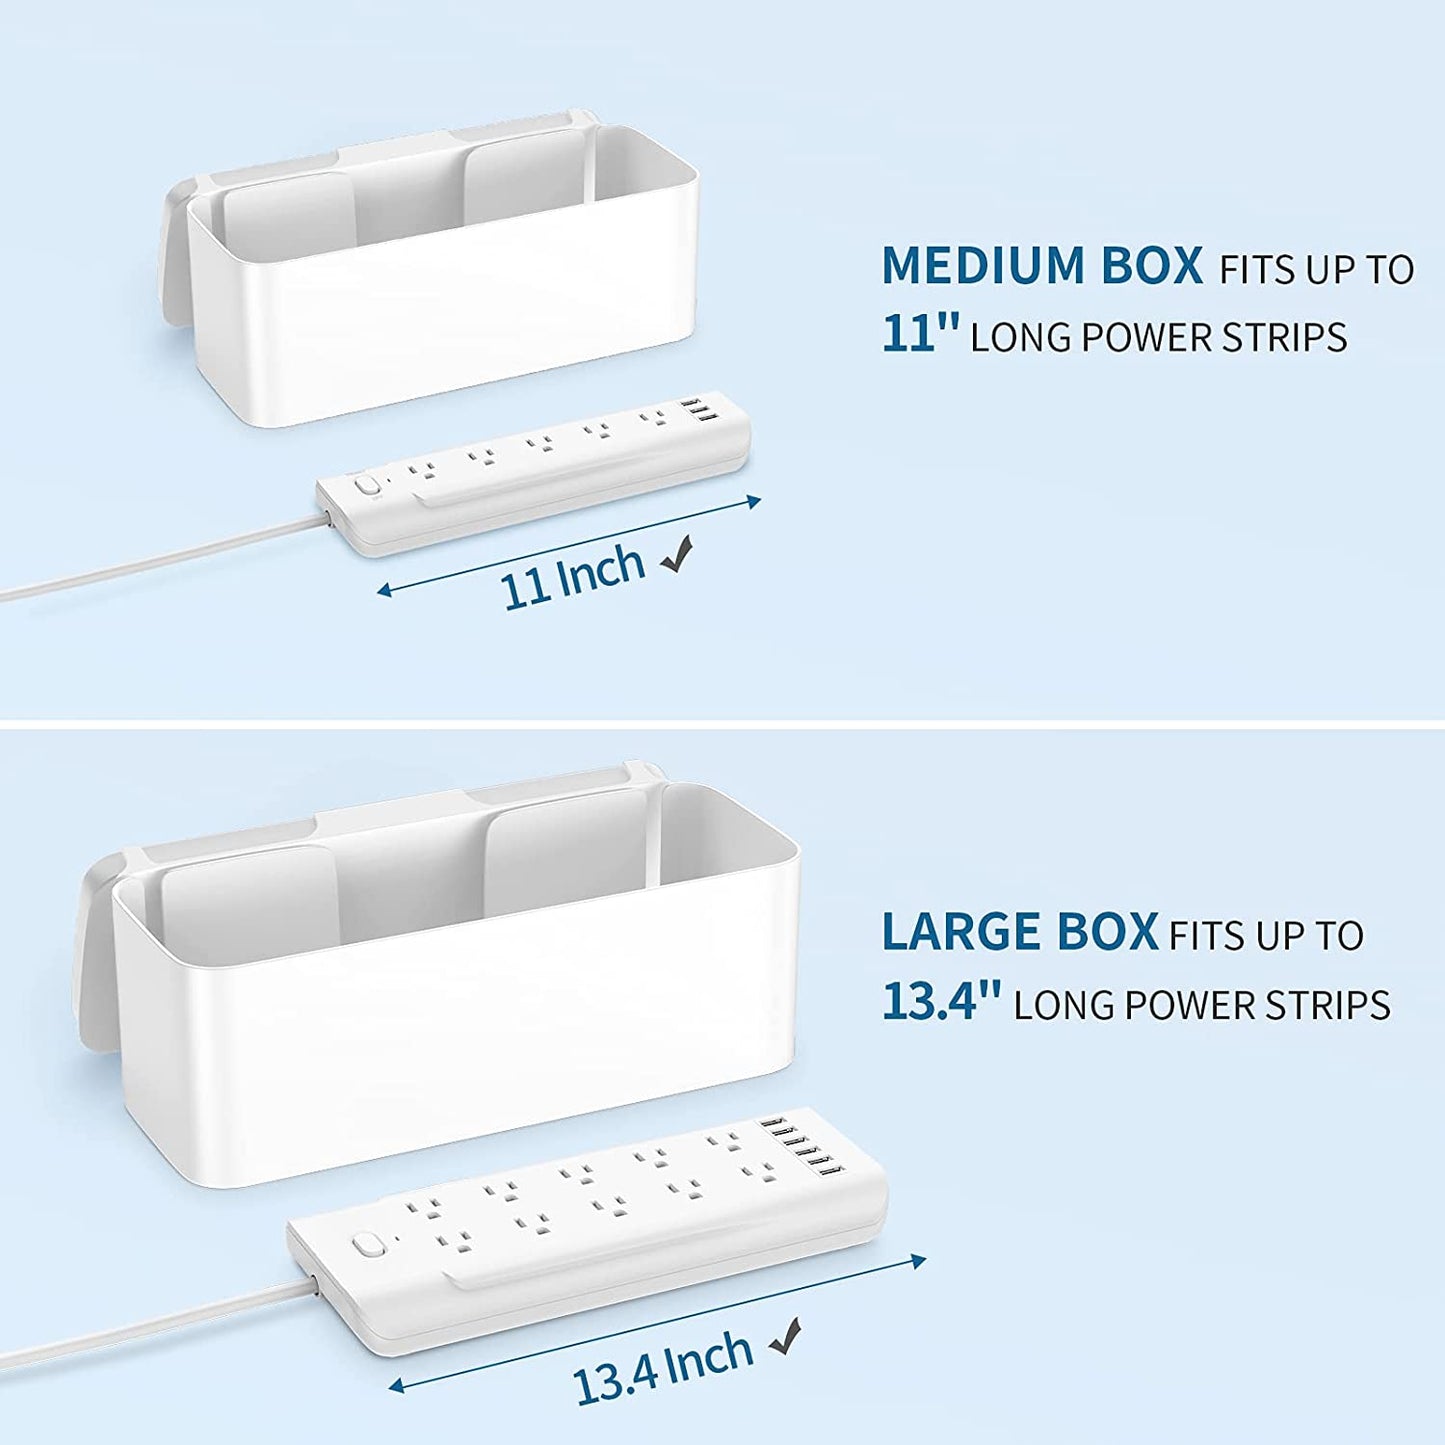 Cord Organizer Cable Management Box Cover For USB USB Hub, TV Wires, Power Strips Proof Lock-White - 2 Pack